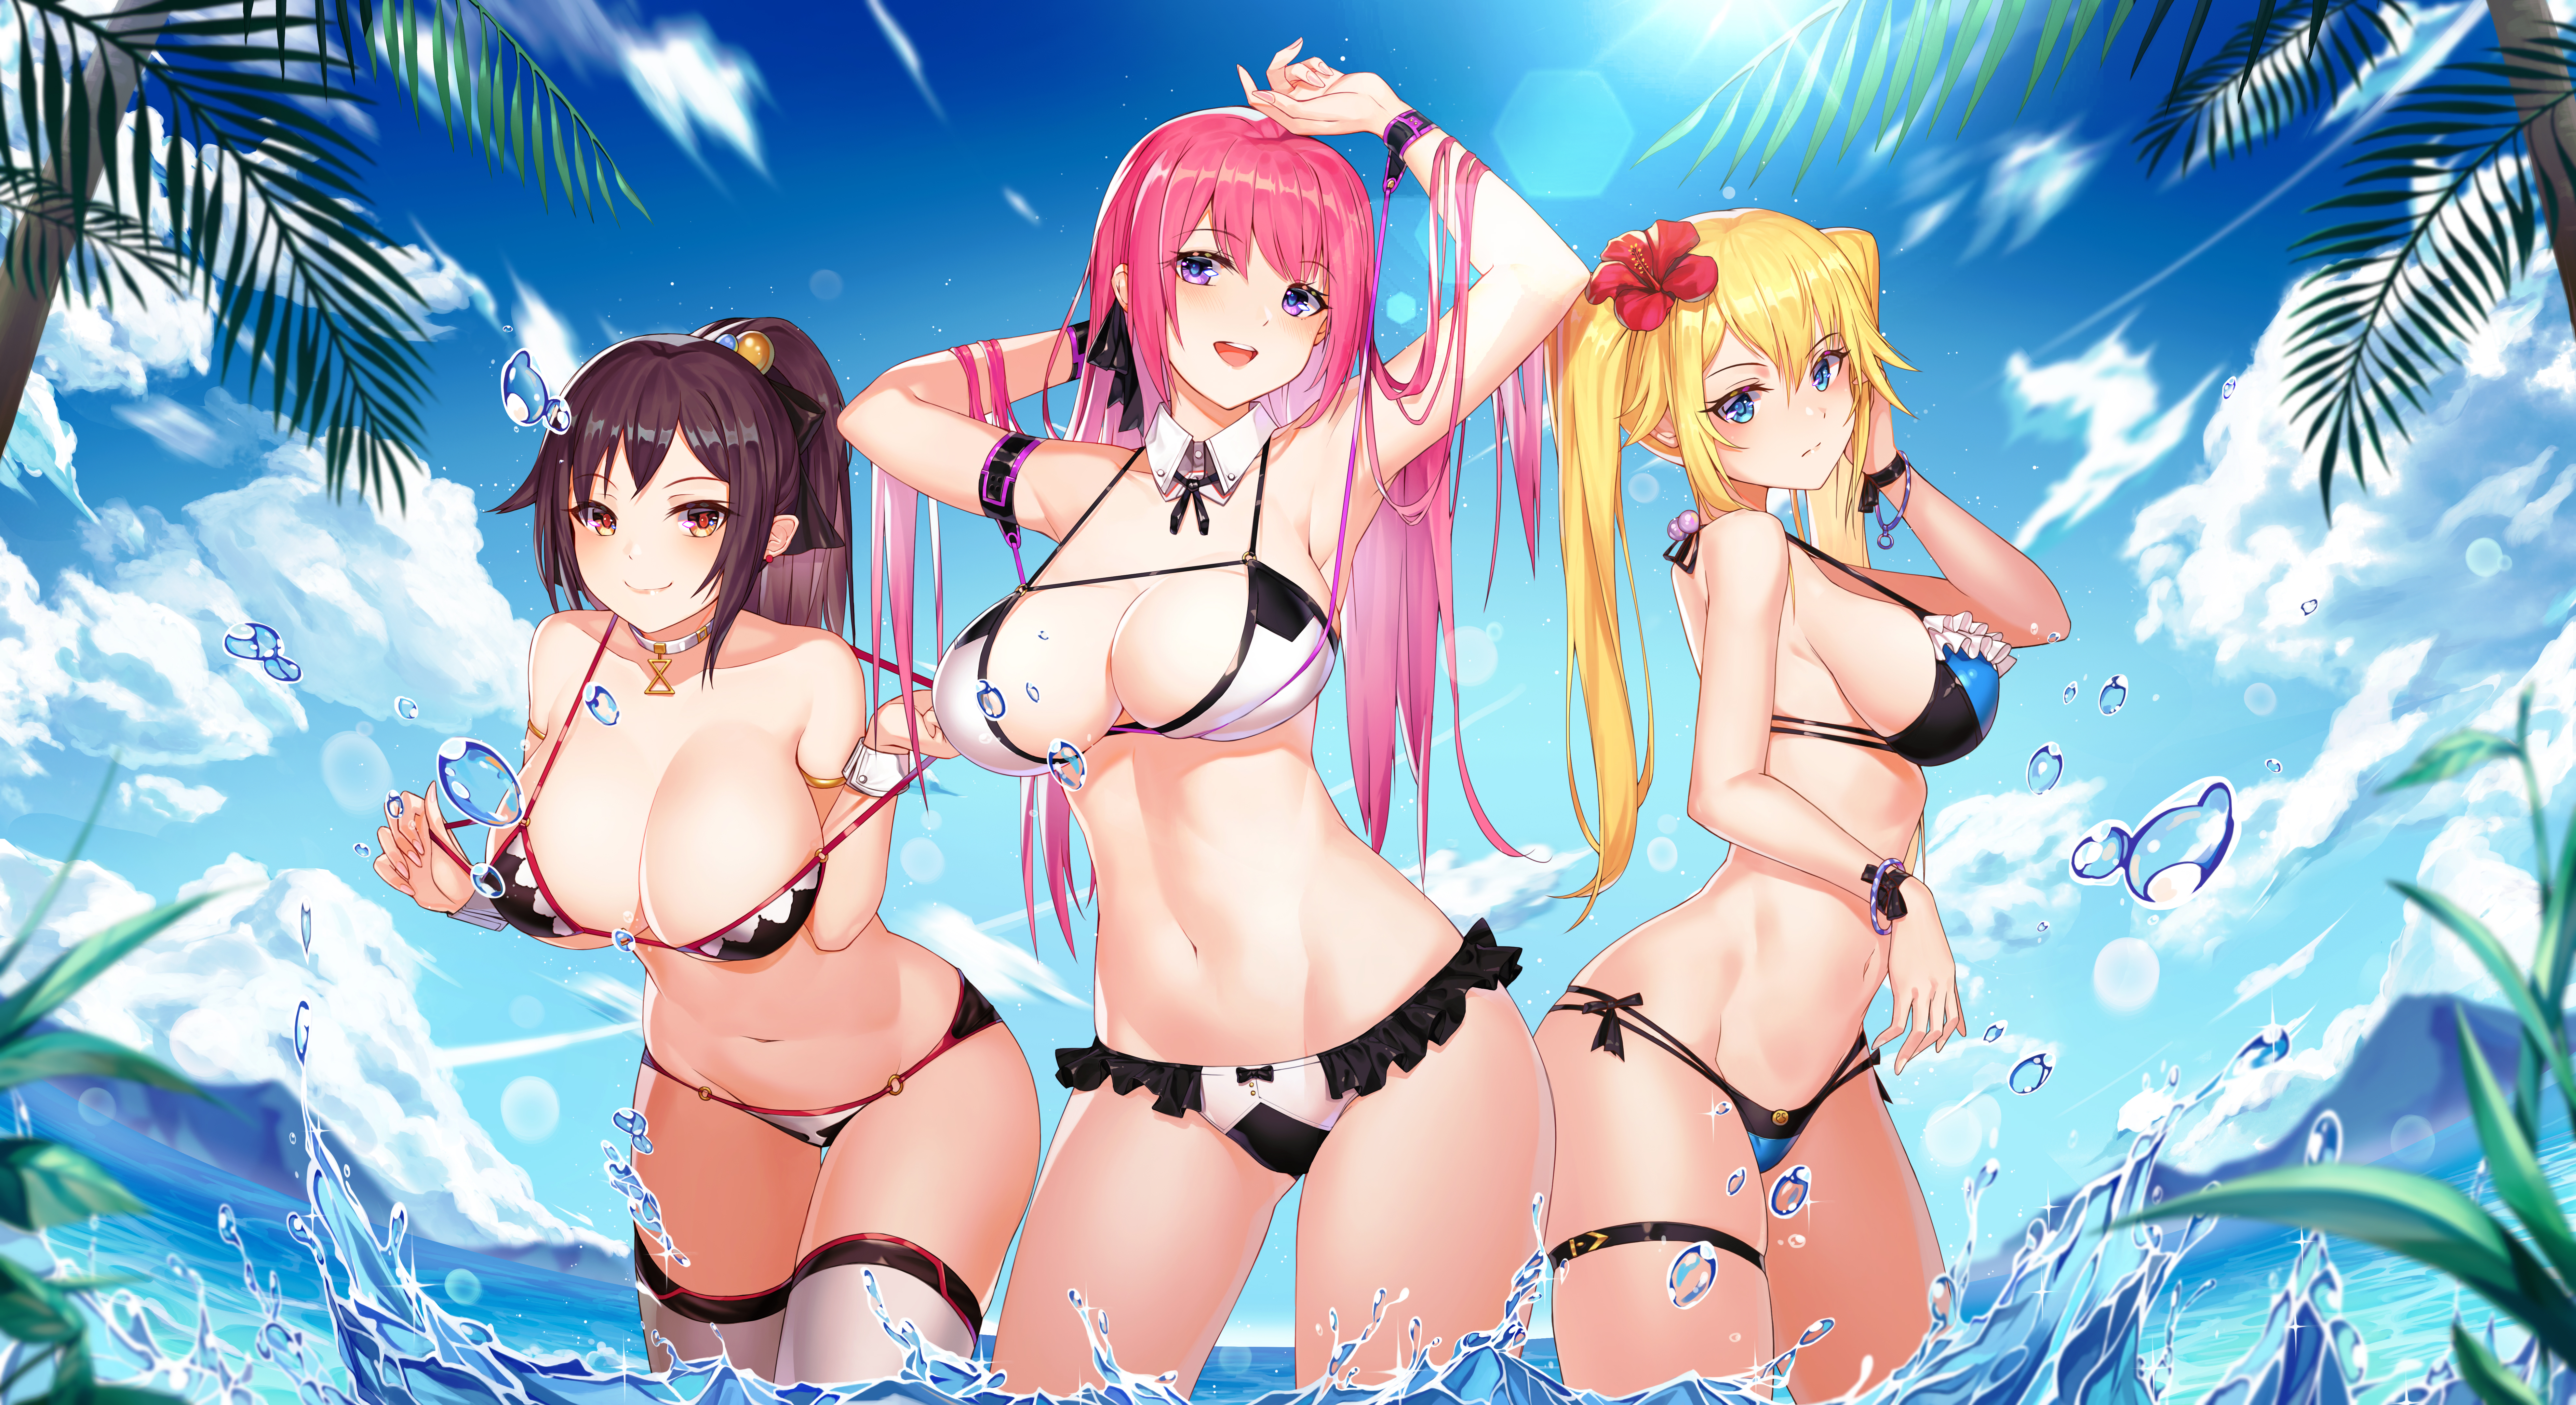 Anime 7920x4320 anime anime girls Btraphen artwork brunette pink hair blonde twintails ponytail long hair bikini string bikini belly cleavage sideboob big boobs standing arms up women trio water group of women palm trees hibiscus flower in hair clouds micro bikini bubbles standing in water water drops